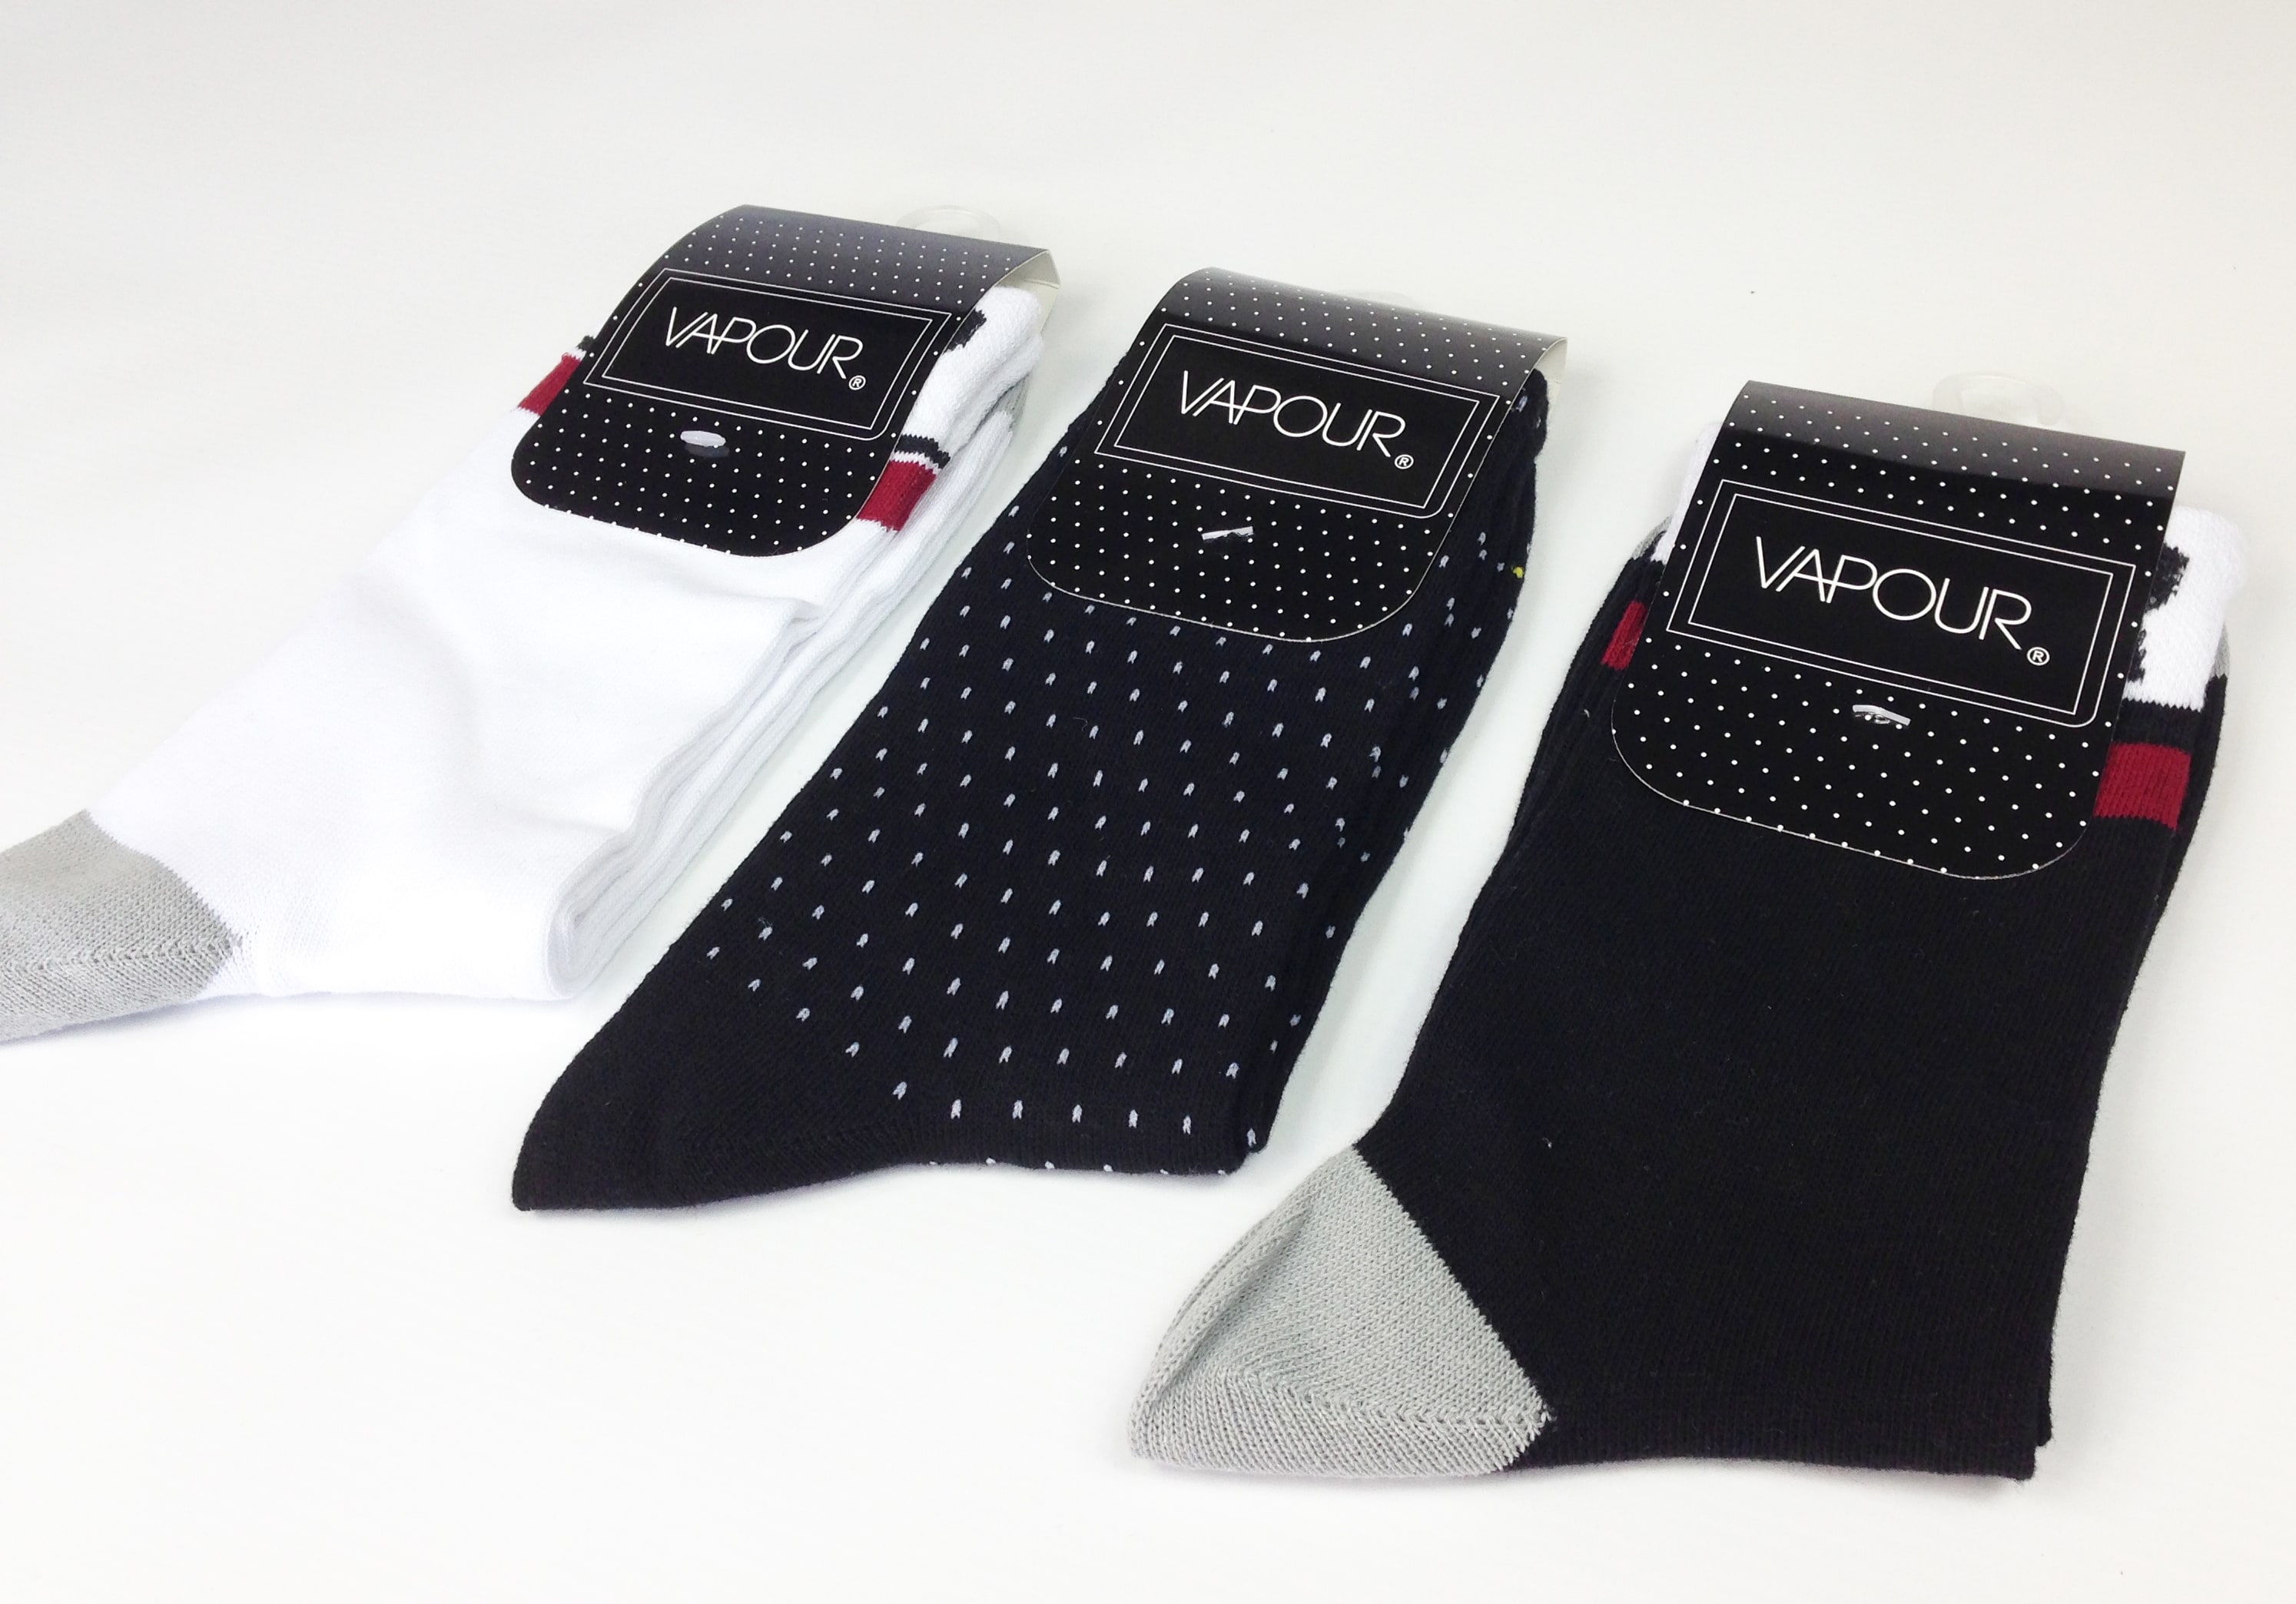 Some cool new socks from Vapour Clothing — Hide Your Arms